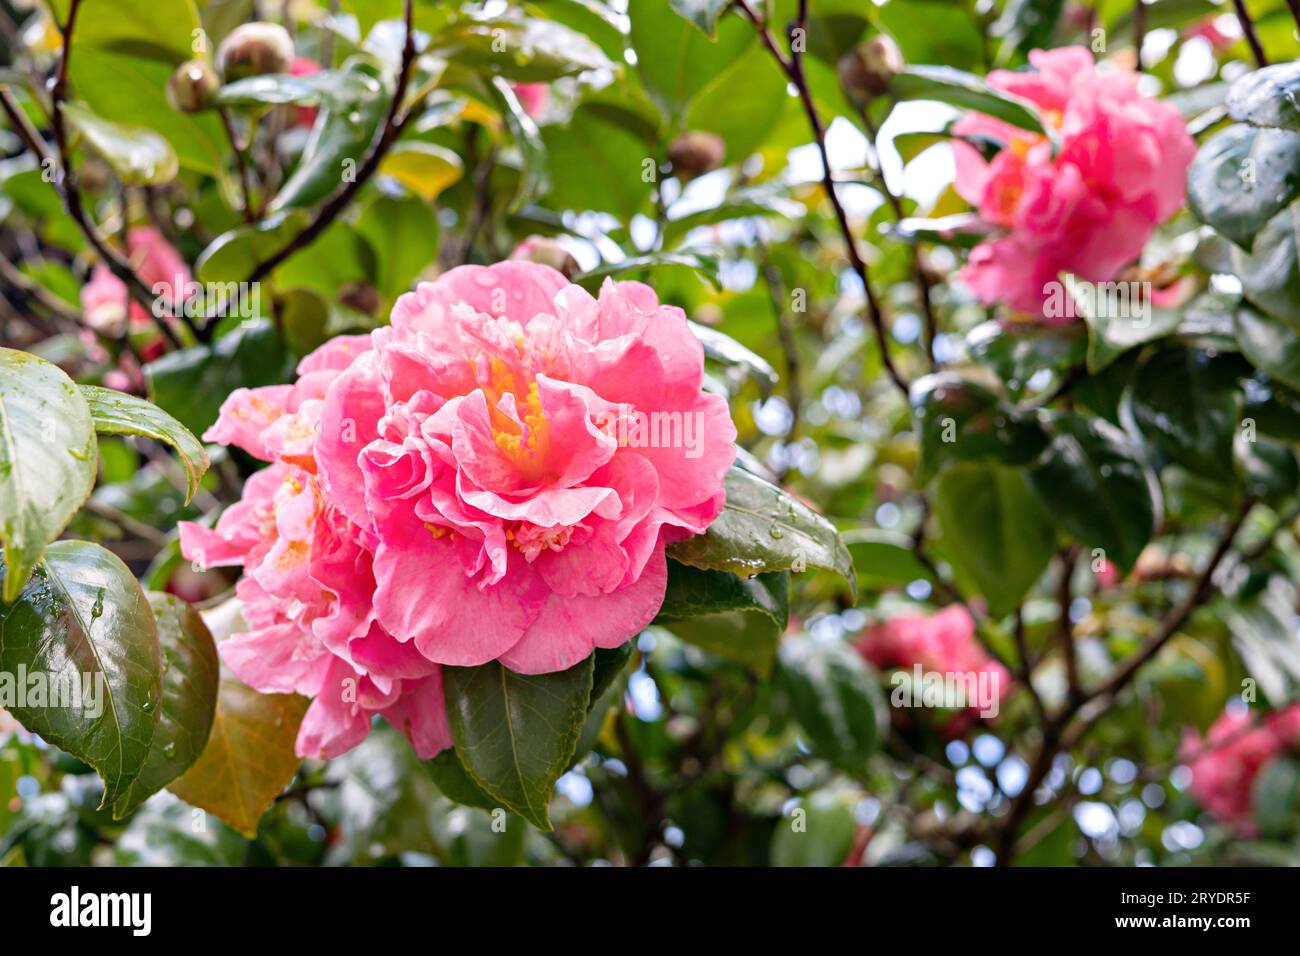 Pink camellia flower on tree with dew drops. WinterÂ´s rose Stock Photo